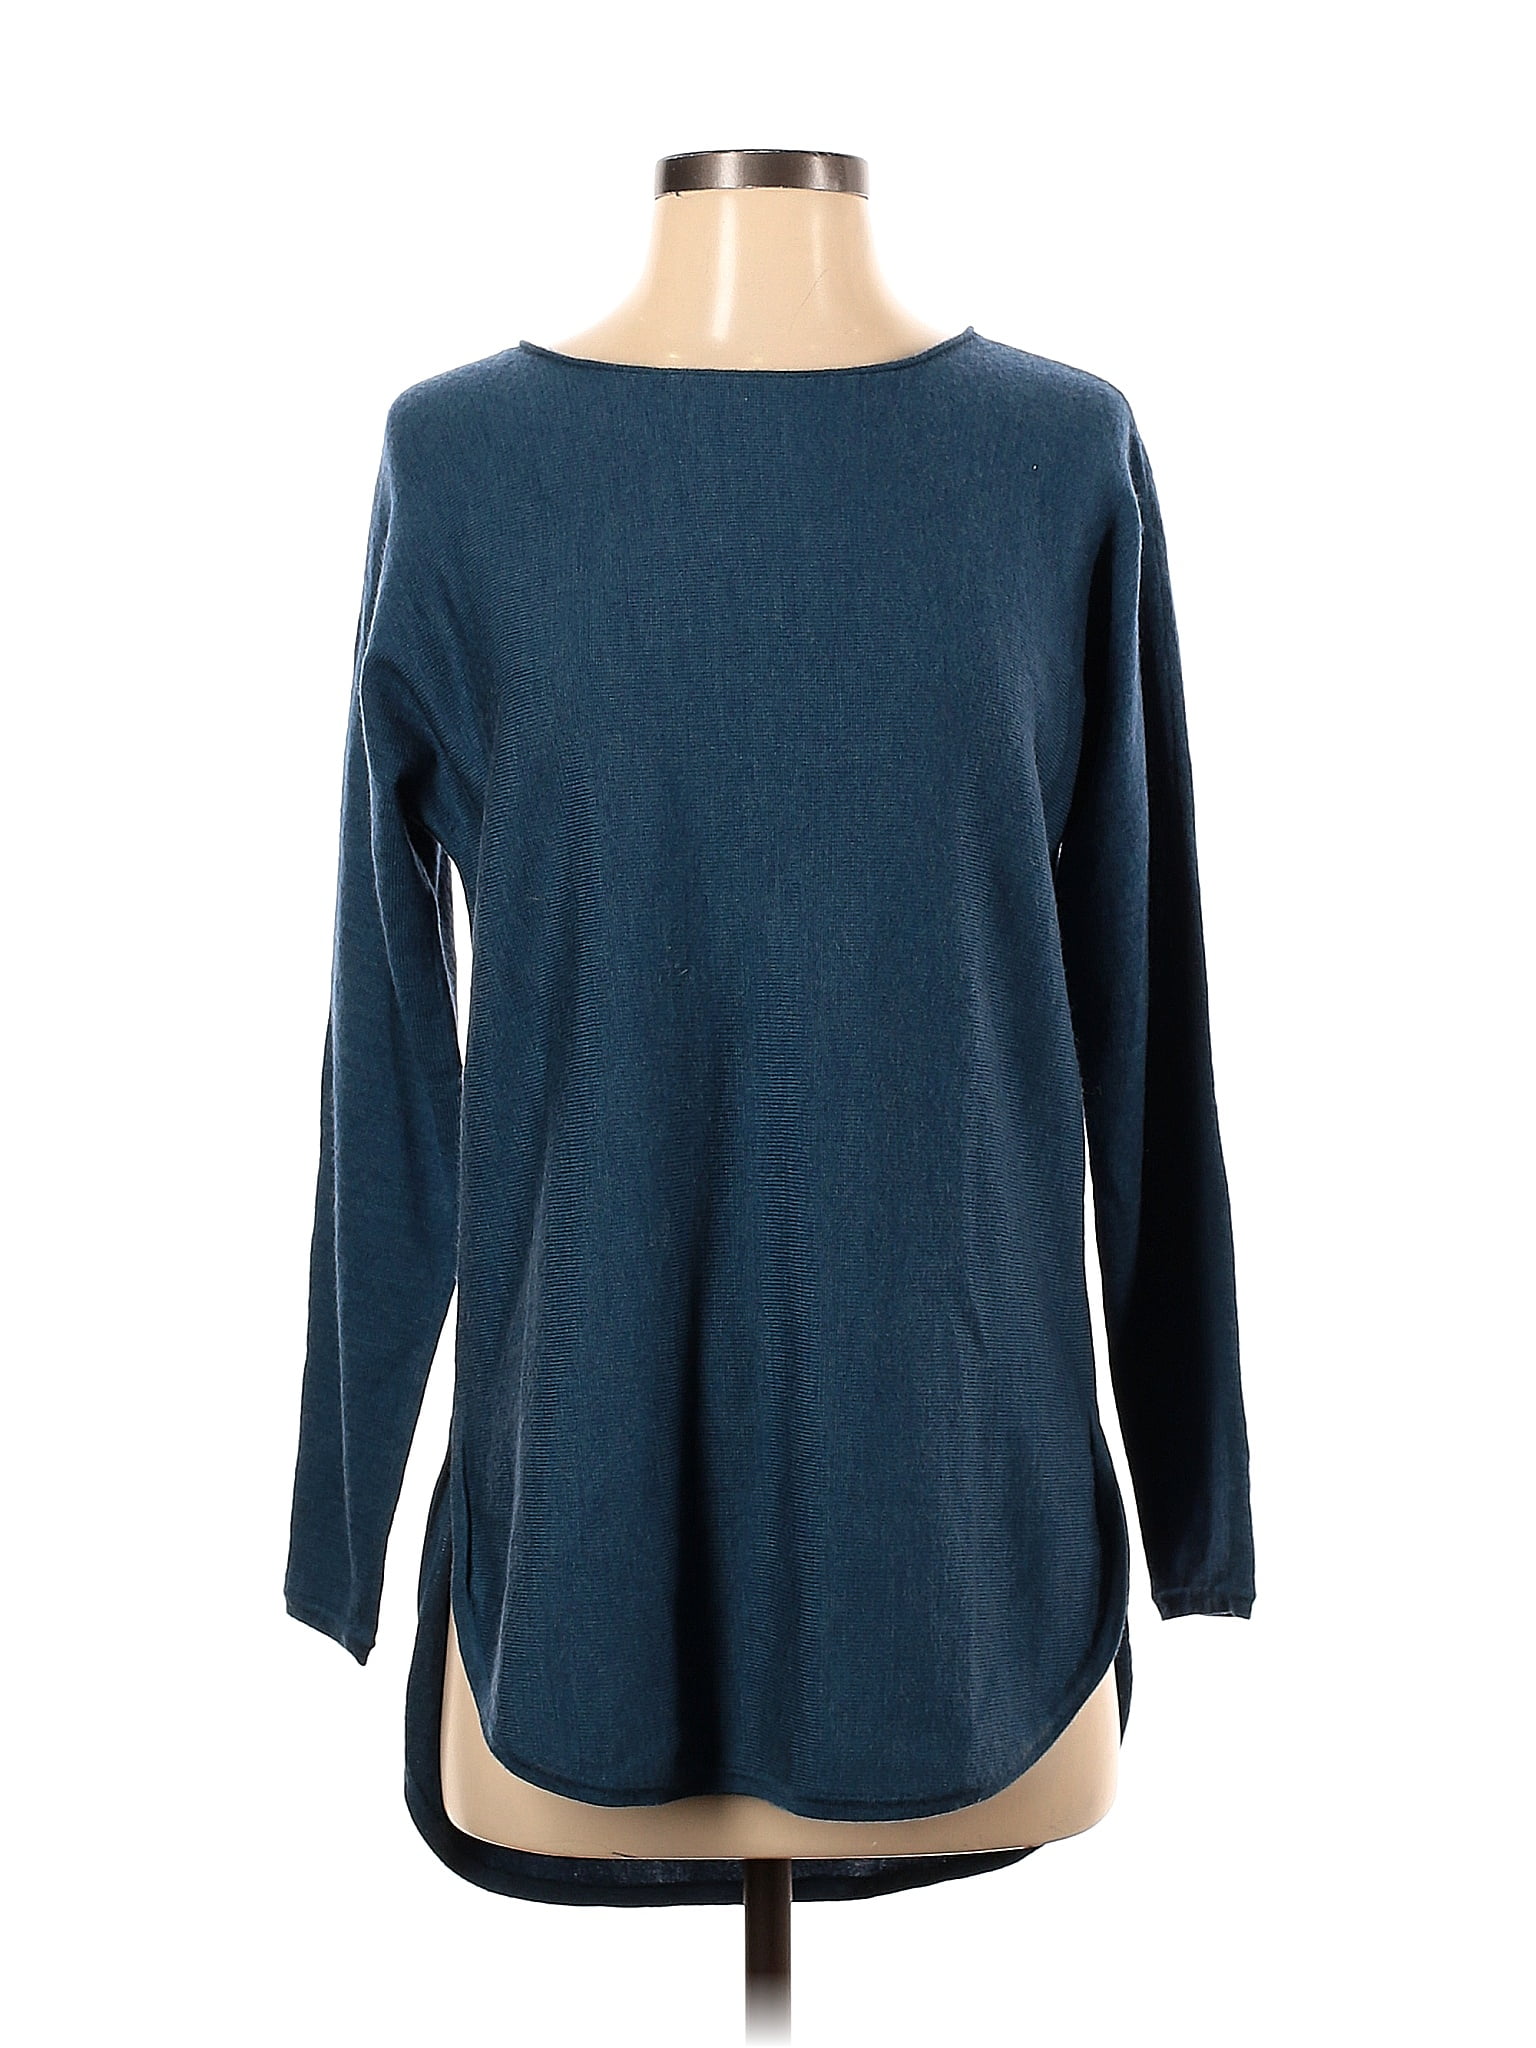 Eileen Fisher 100% Wool Color Block Solid Teal Blue Wool Pullover ...